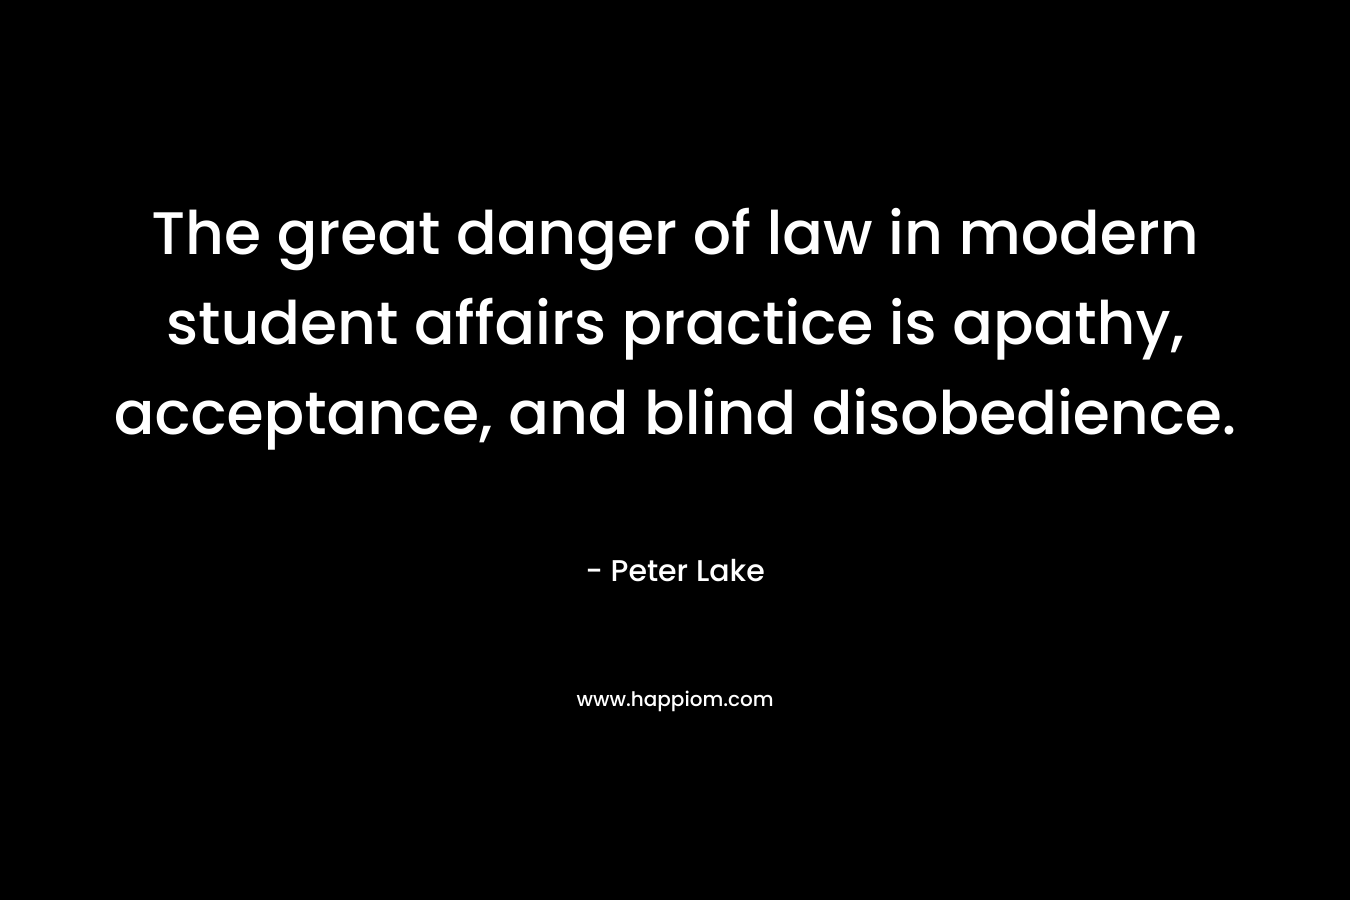 The great danger of law in modern student affairs practice is apathy, acceptance, and blind disobedience. – Peter Lake